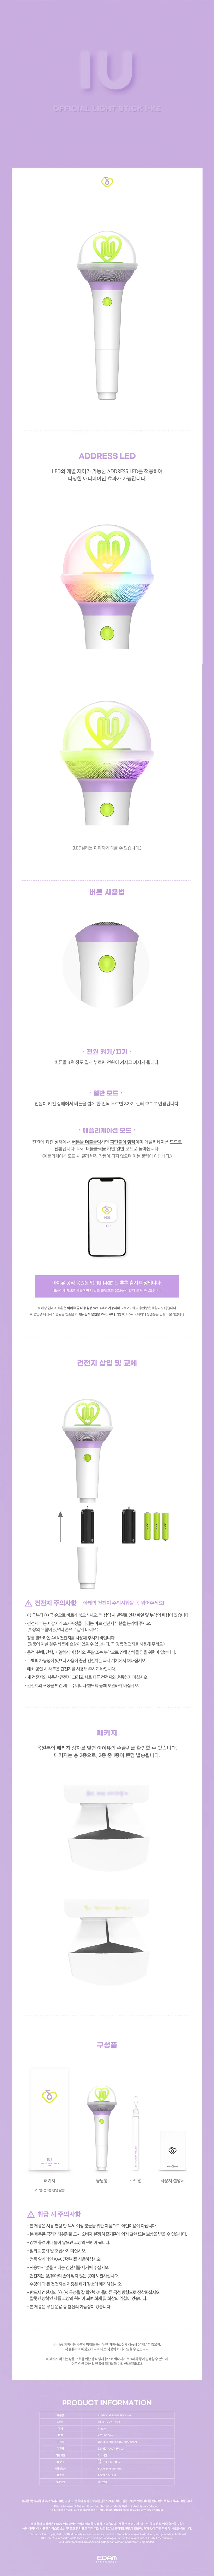 IU - OFFICIAL LIGHT STICK VER.3 - Buy in SD-K STORE